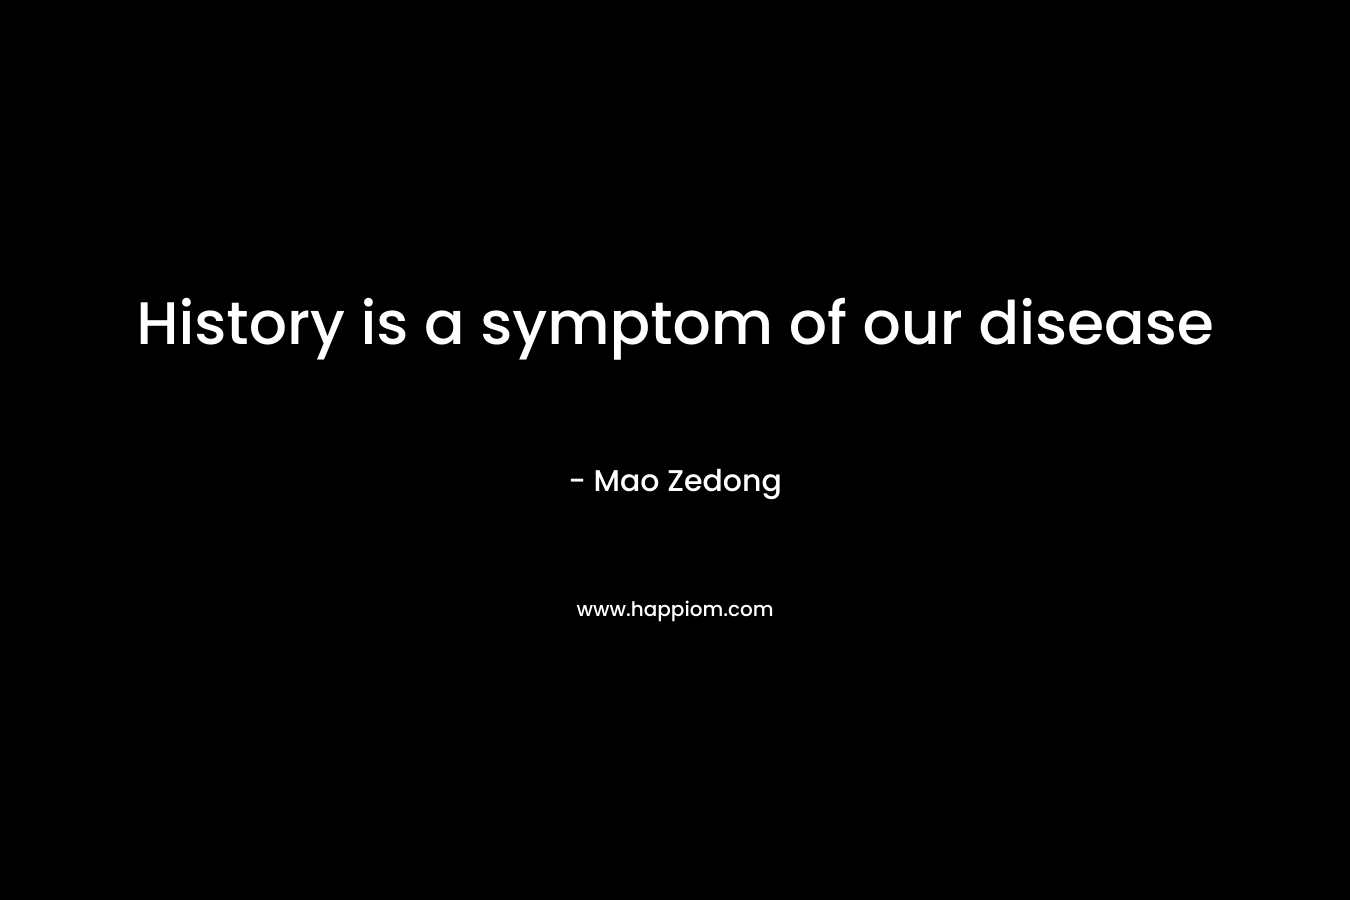 History is a symptom of our disease – Mao Zedong